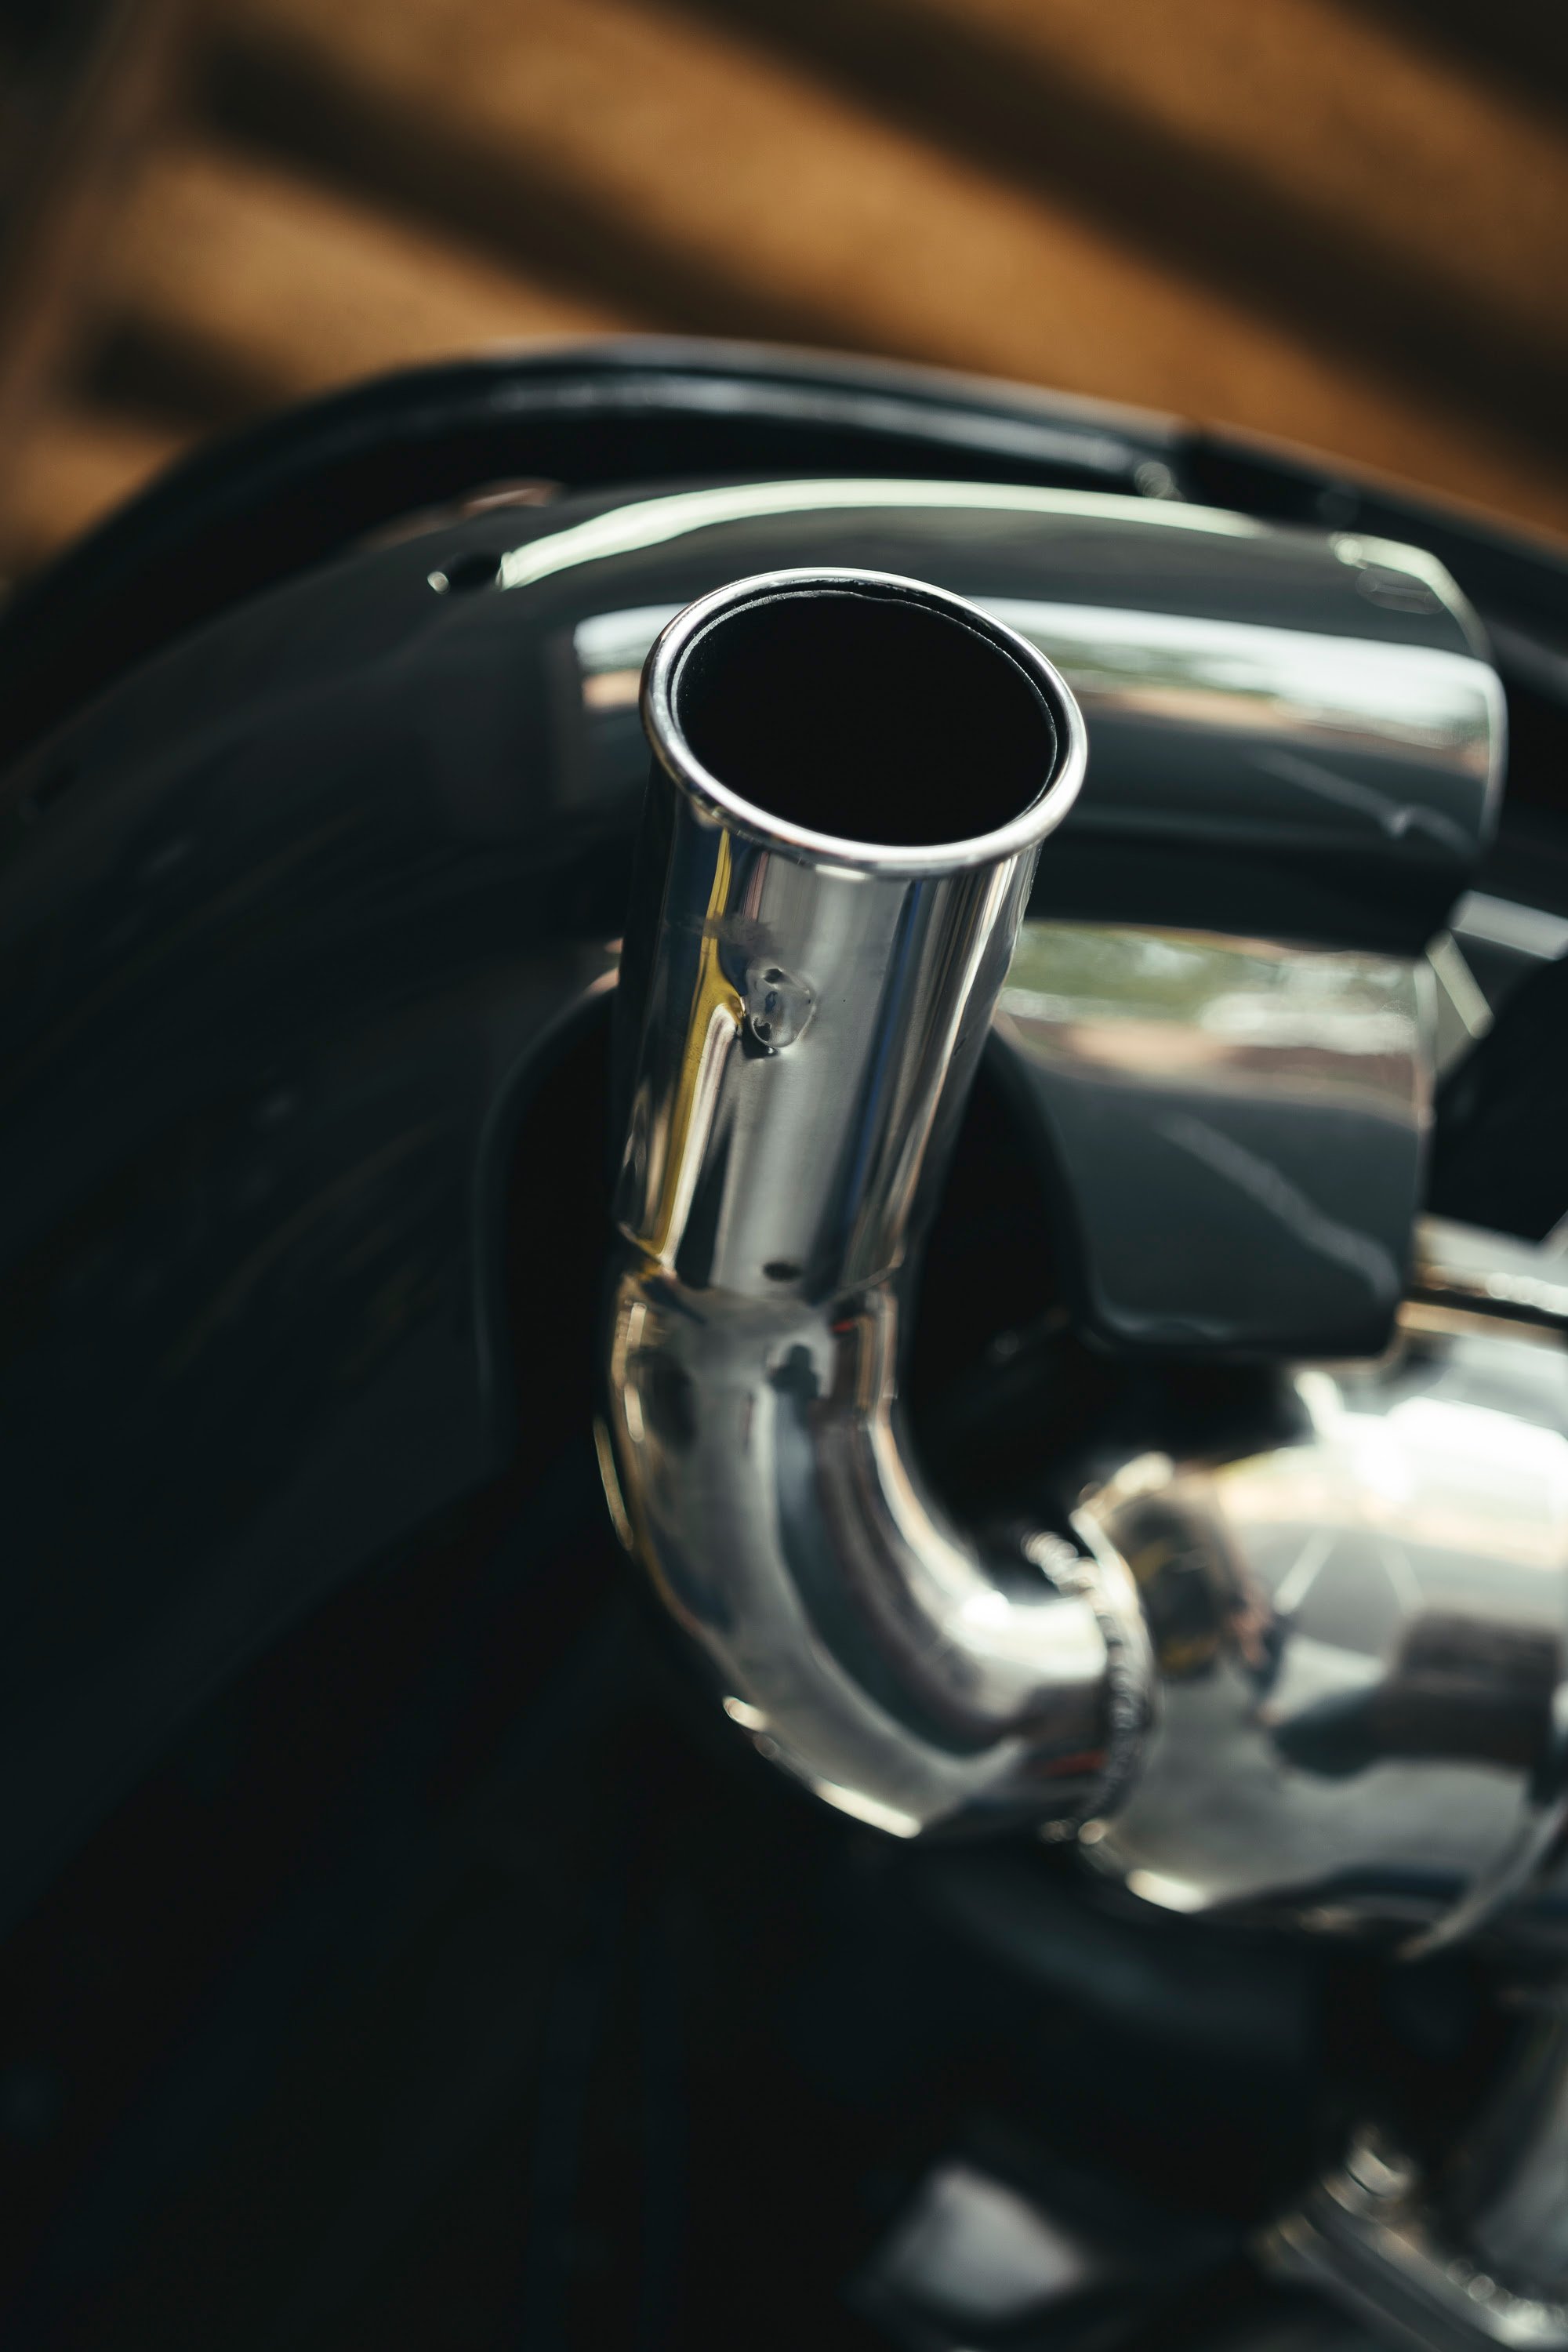 Polished exhaust on a fully restored 911 at CPR.